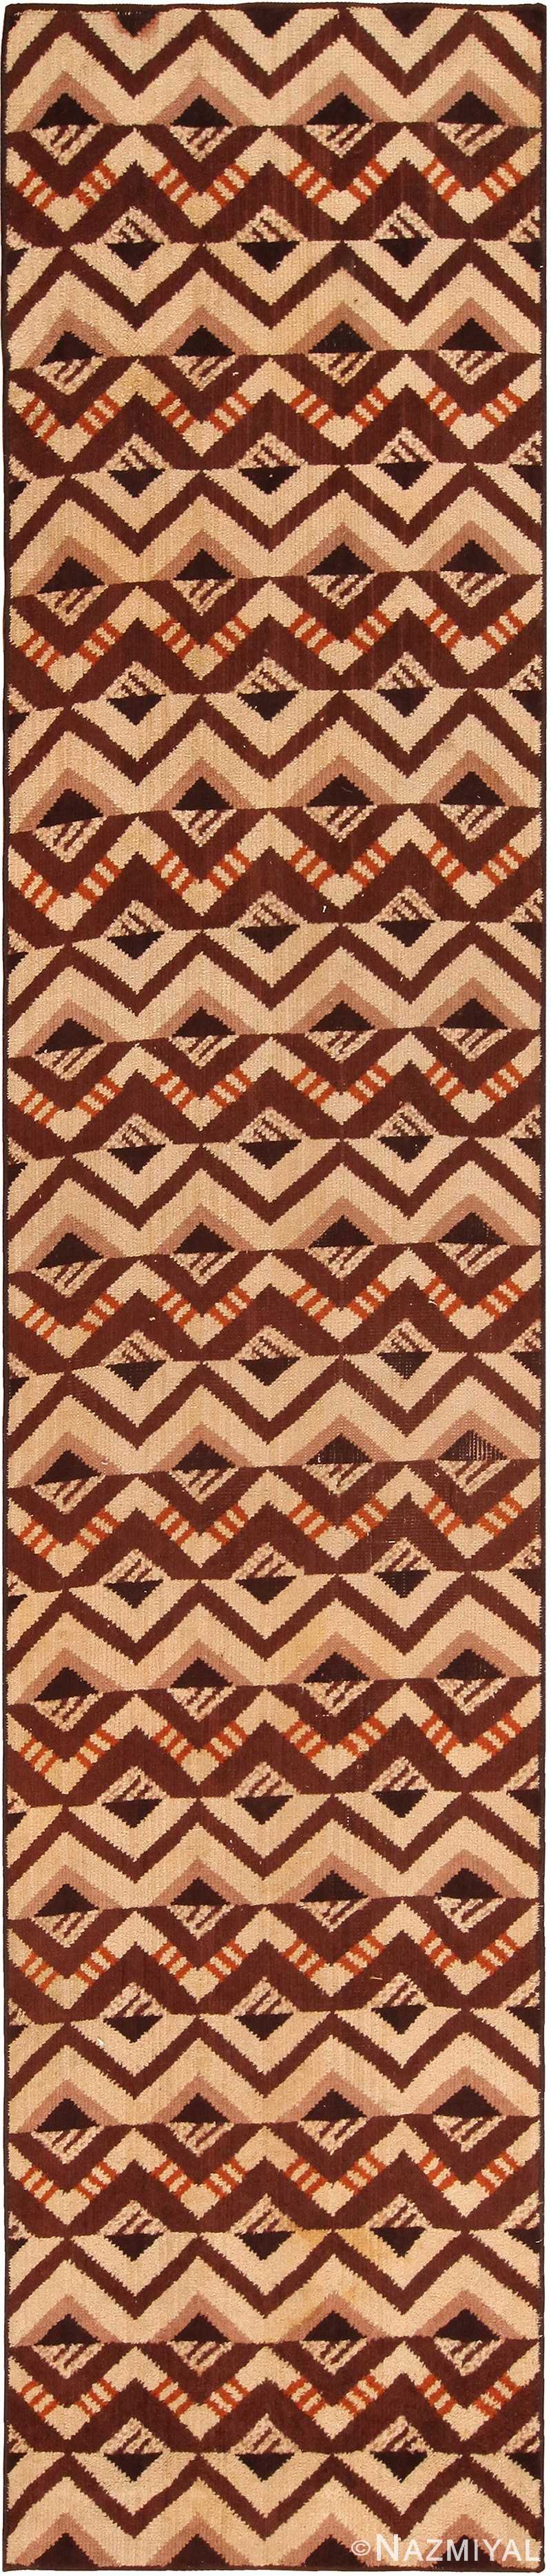 Geometric Vintage French Art Deco Runner Rug 70968 by Nazmiyal Antique Rugs